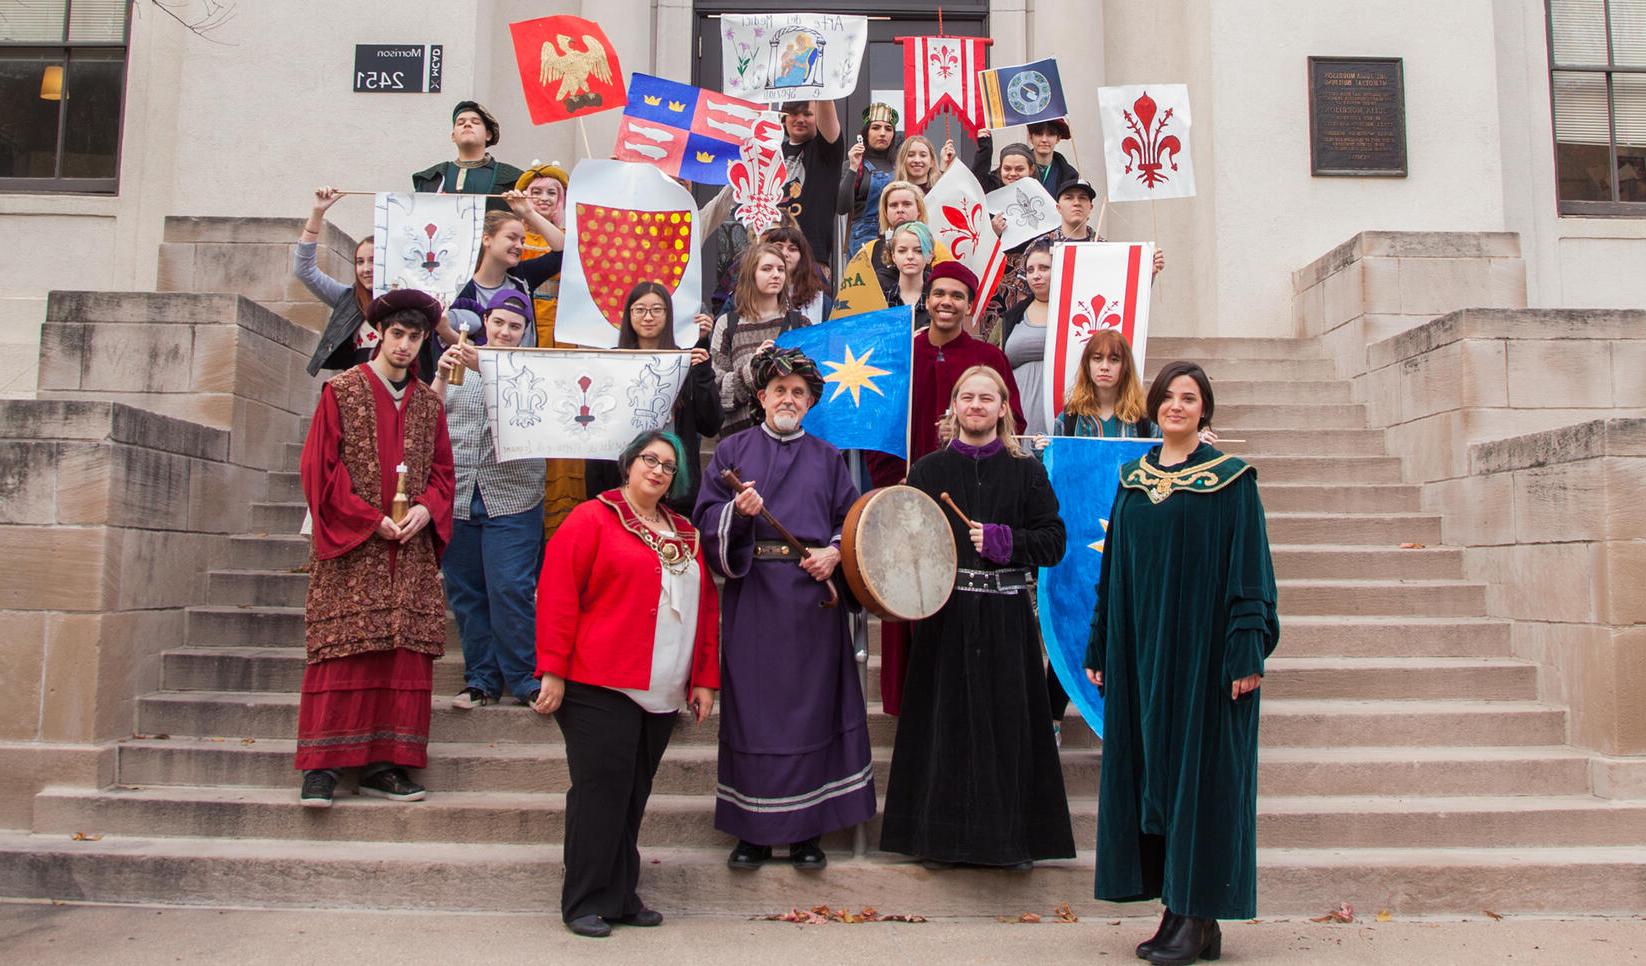 Students in Renaissance clothing for Art History